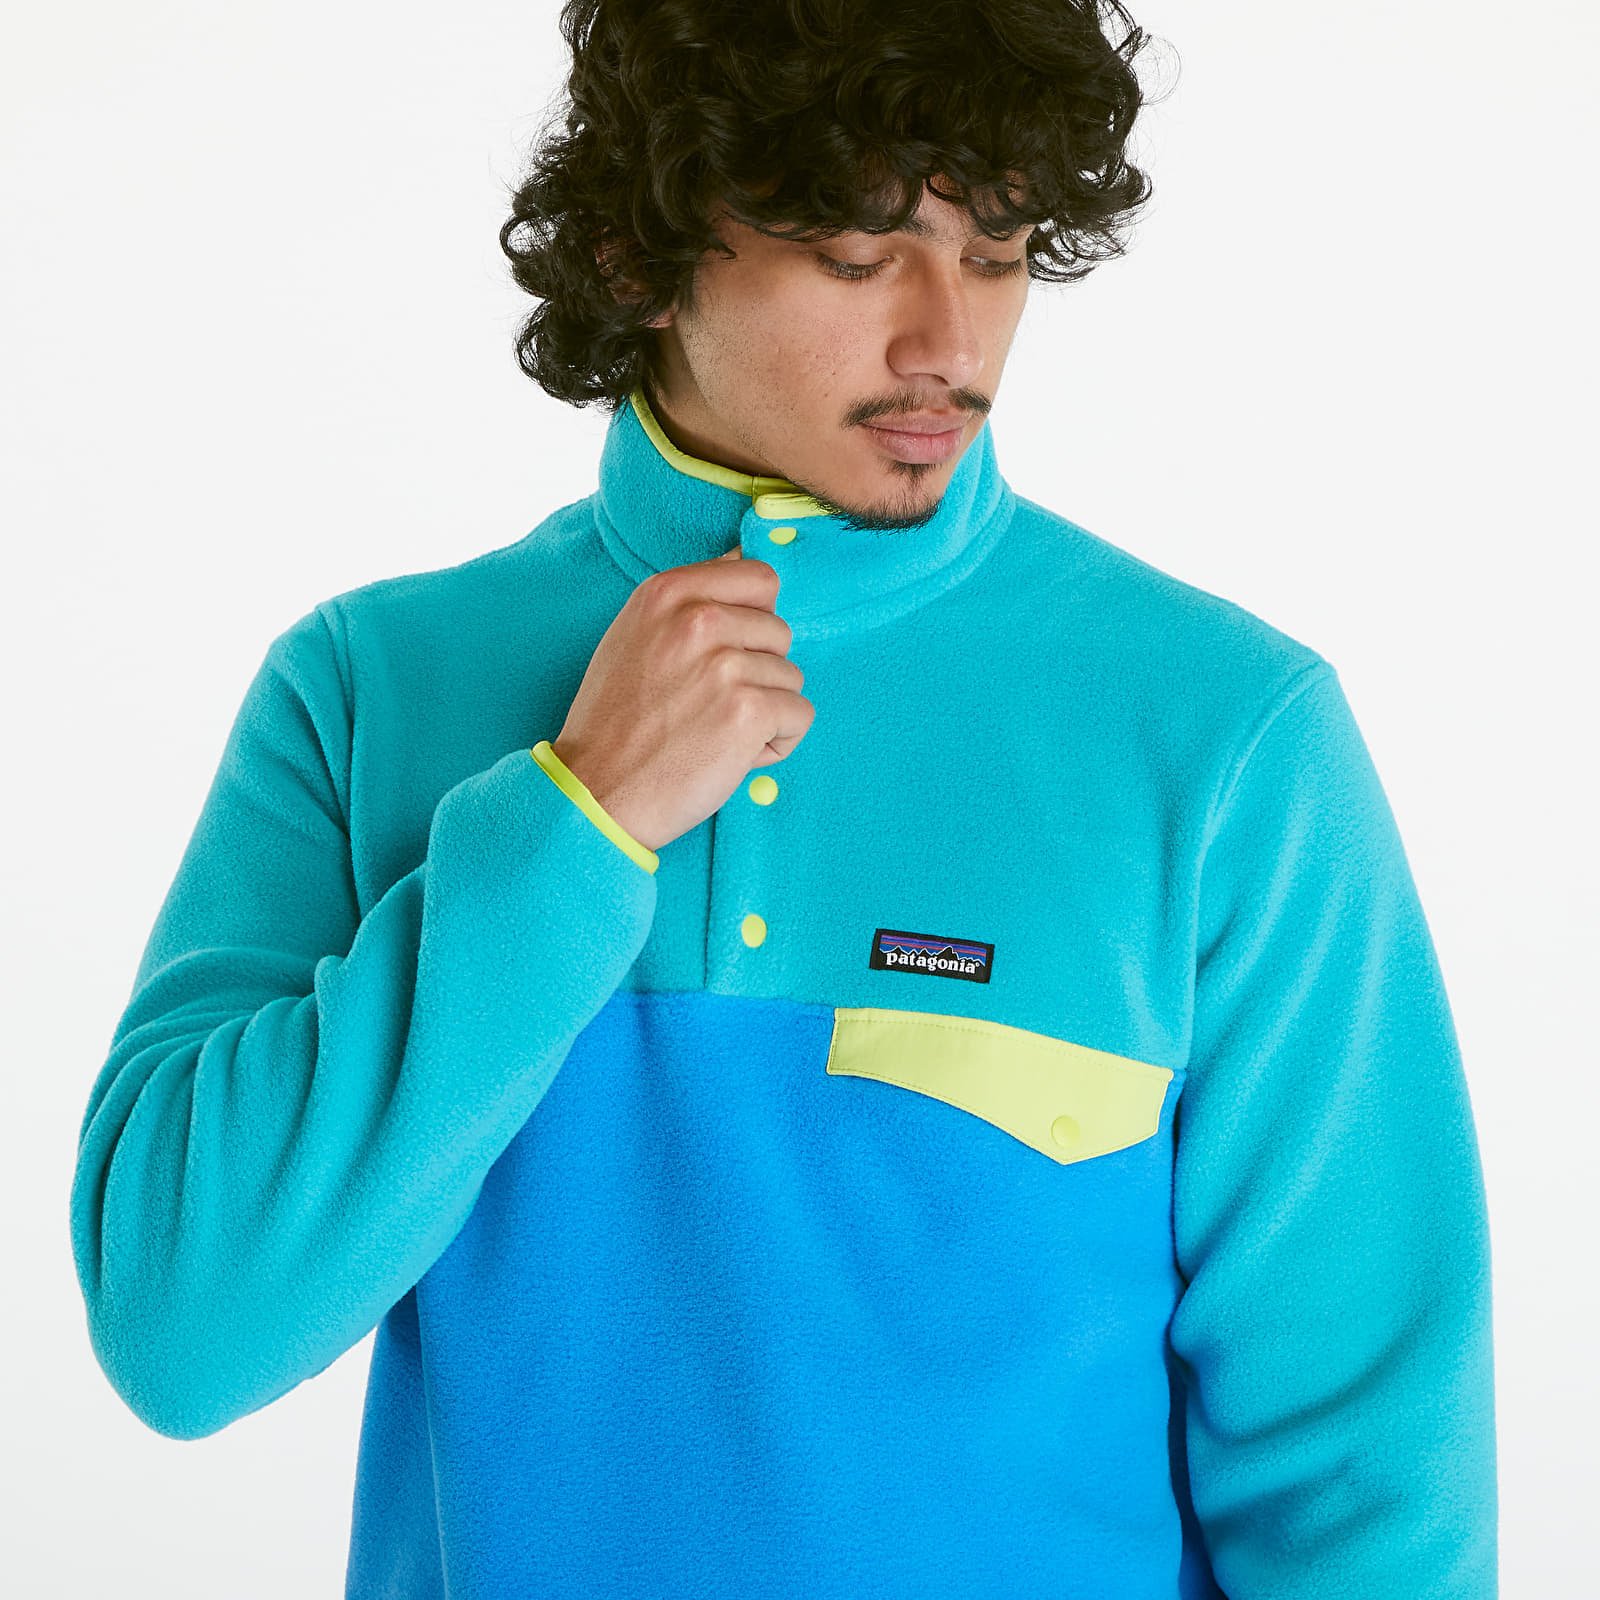 LW Synch Snap-T Pullover Hoody Vessel Blue